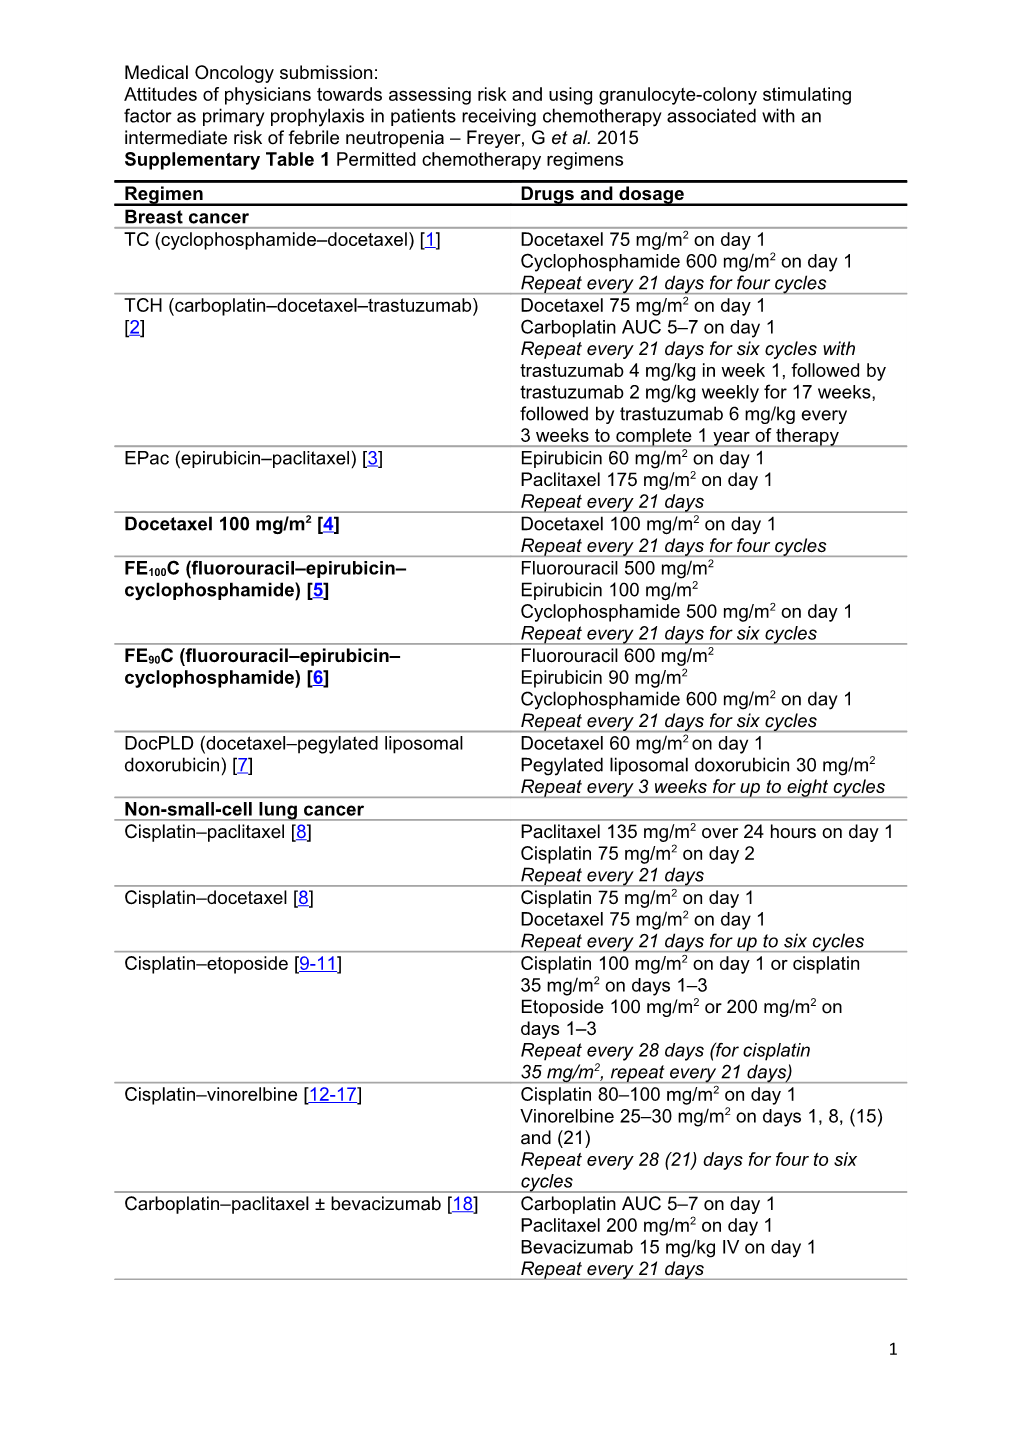 Supplementary Table 1 Permitted Chemotherapy Regimens